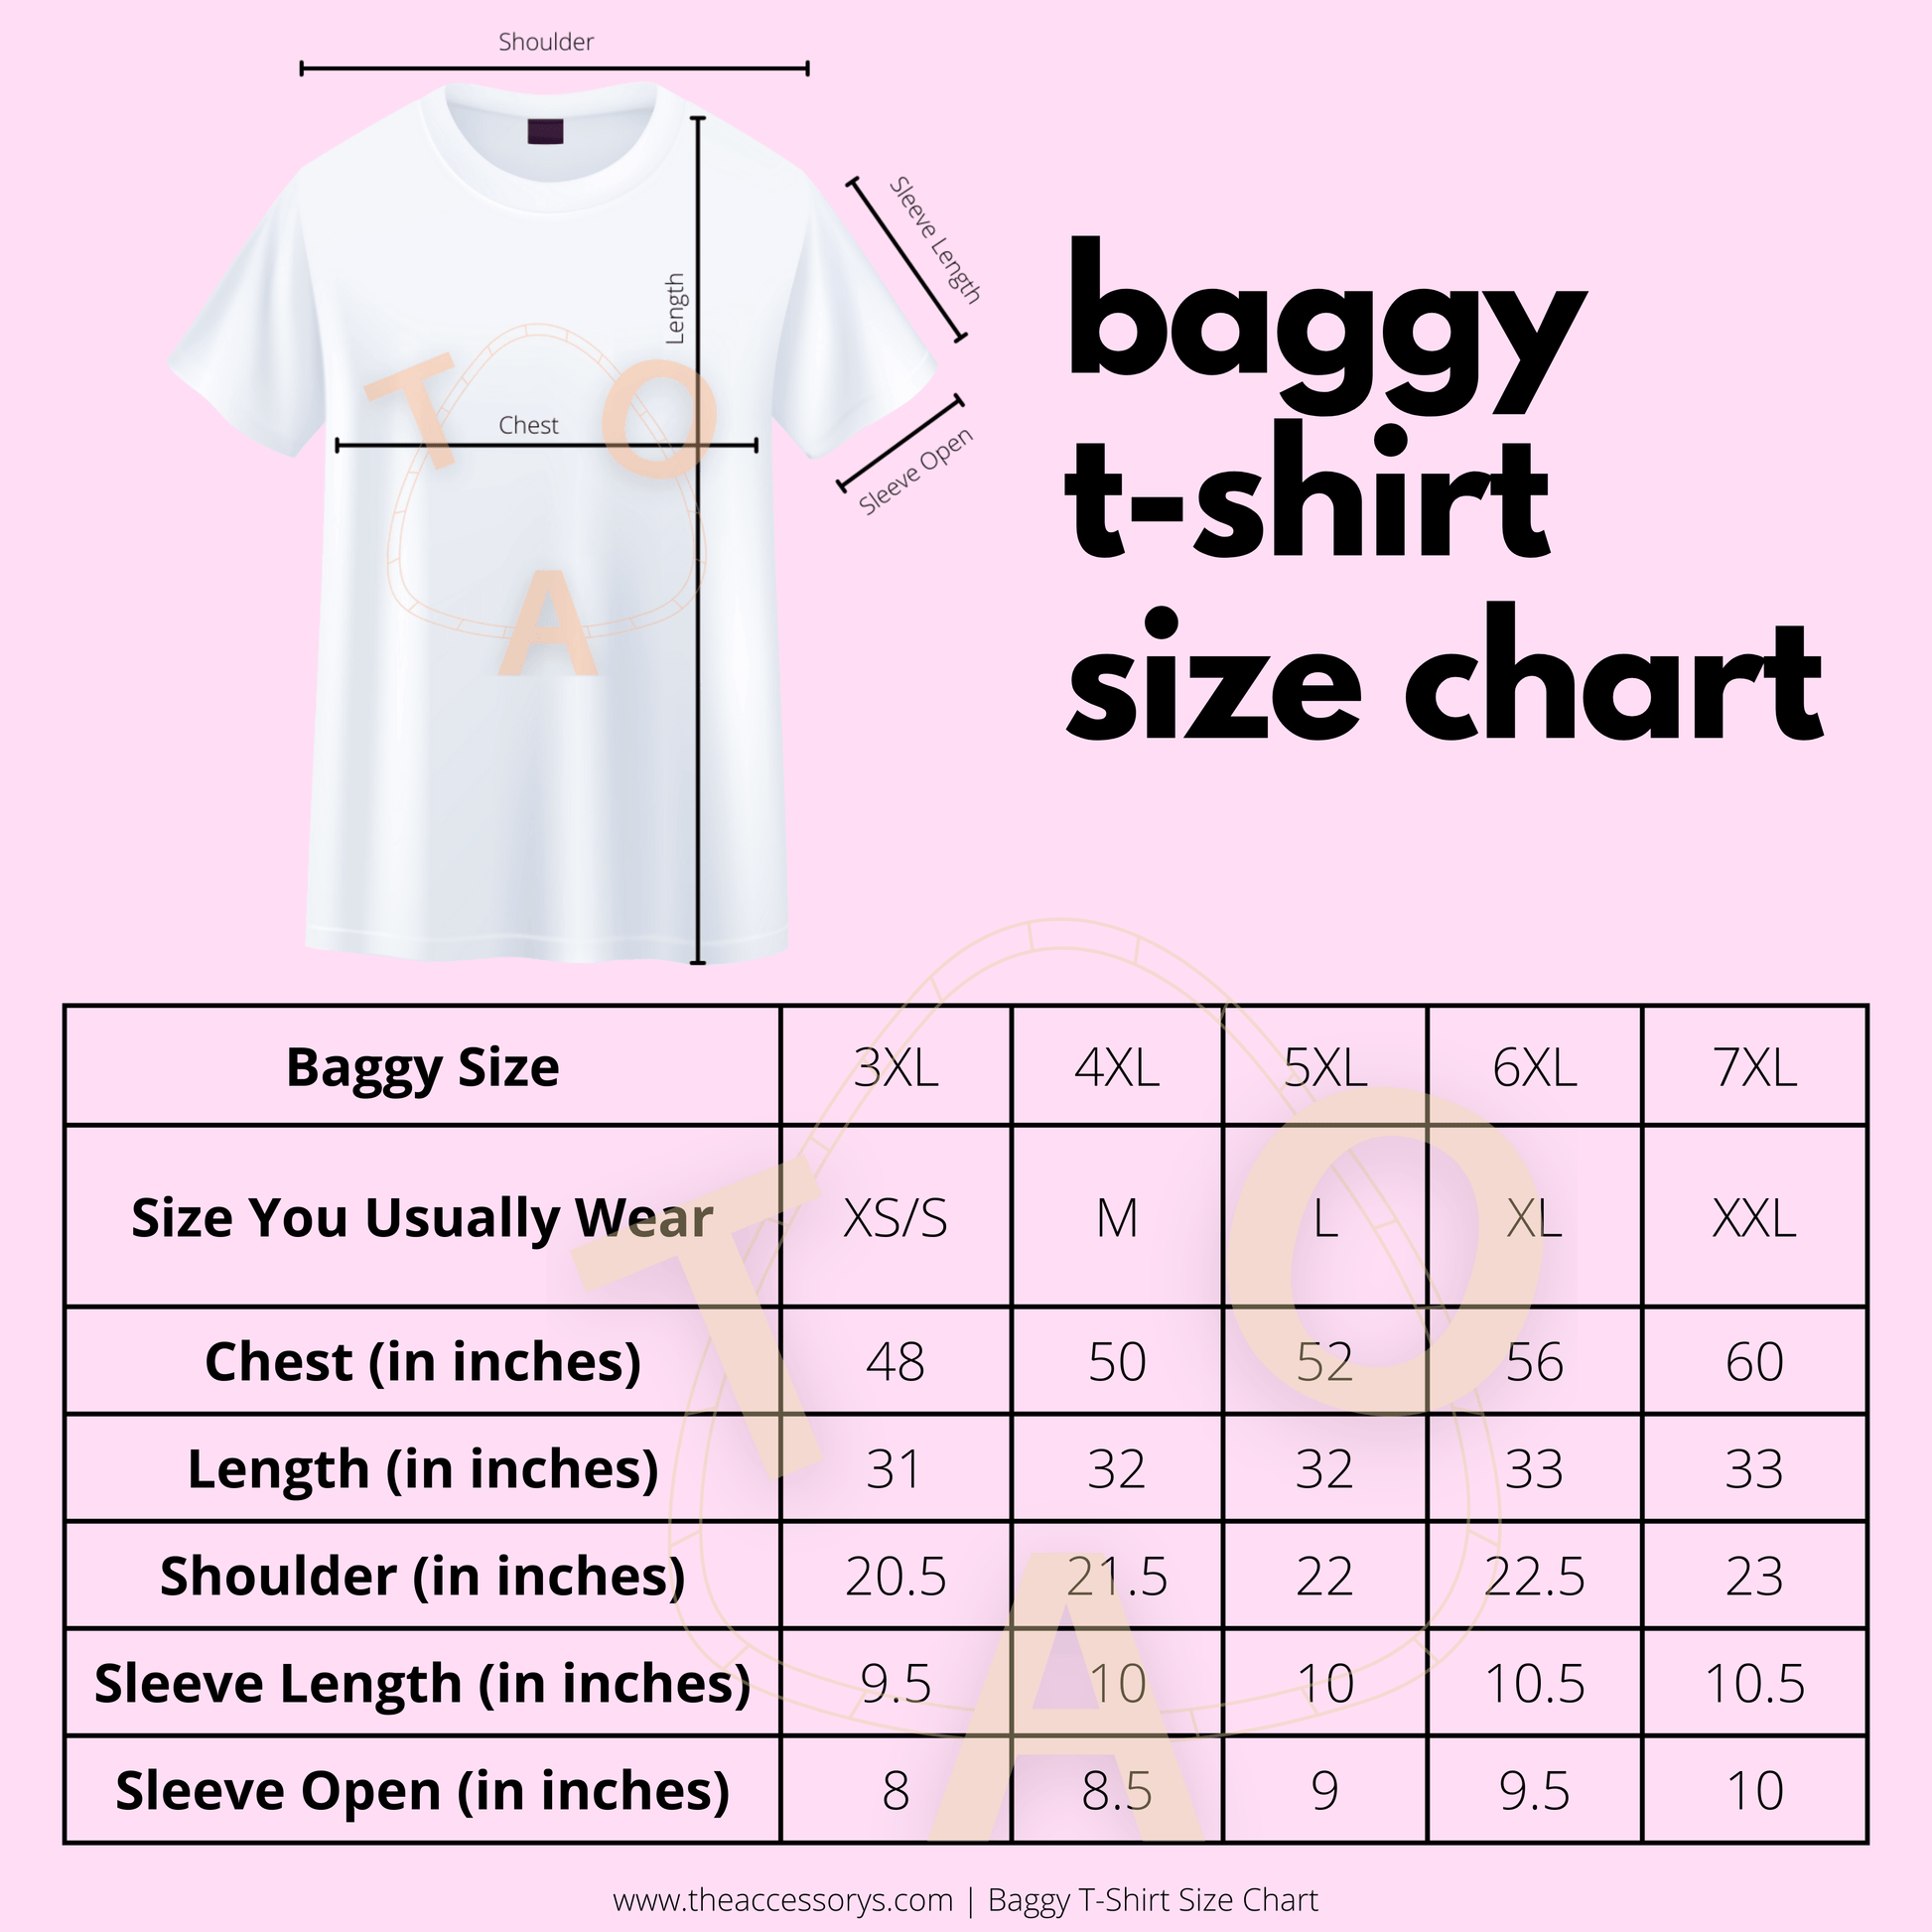 Femme Fatale Baggy T-Shirt - The Accessorys Official